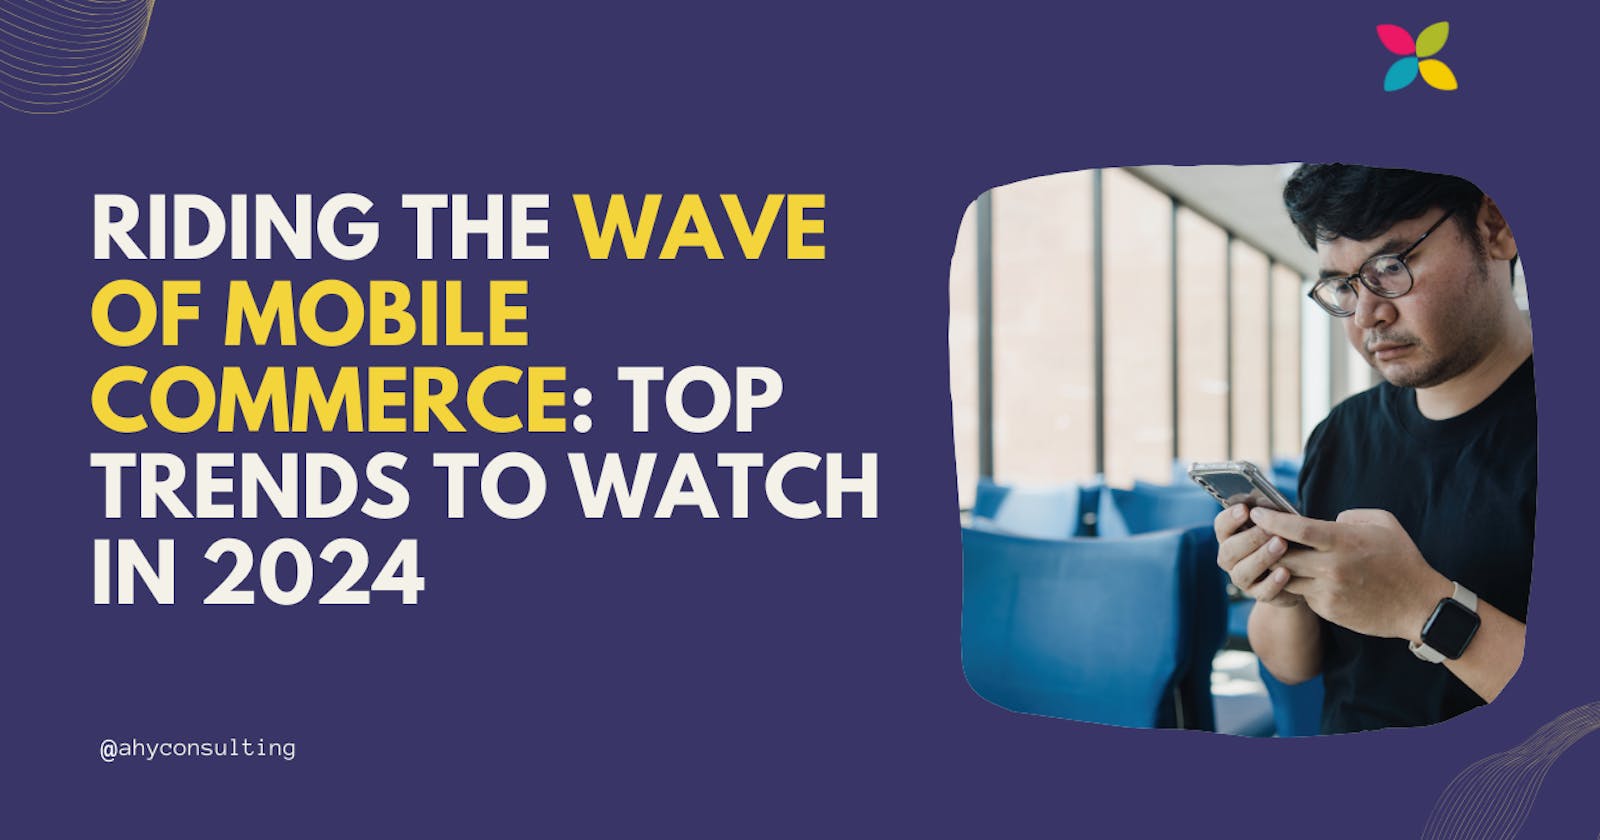 Riding the Wave of Mobile Commerce: Top Trends to Watch in 2024